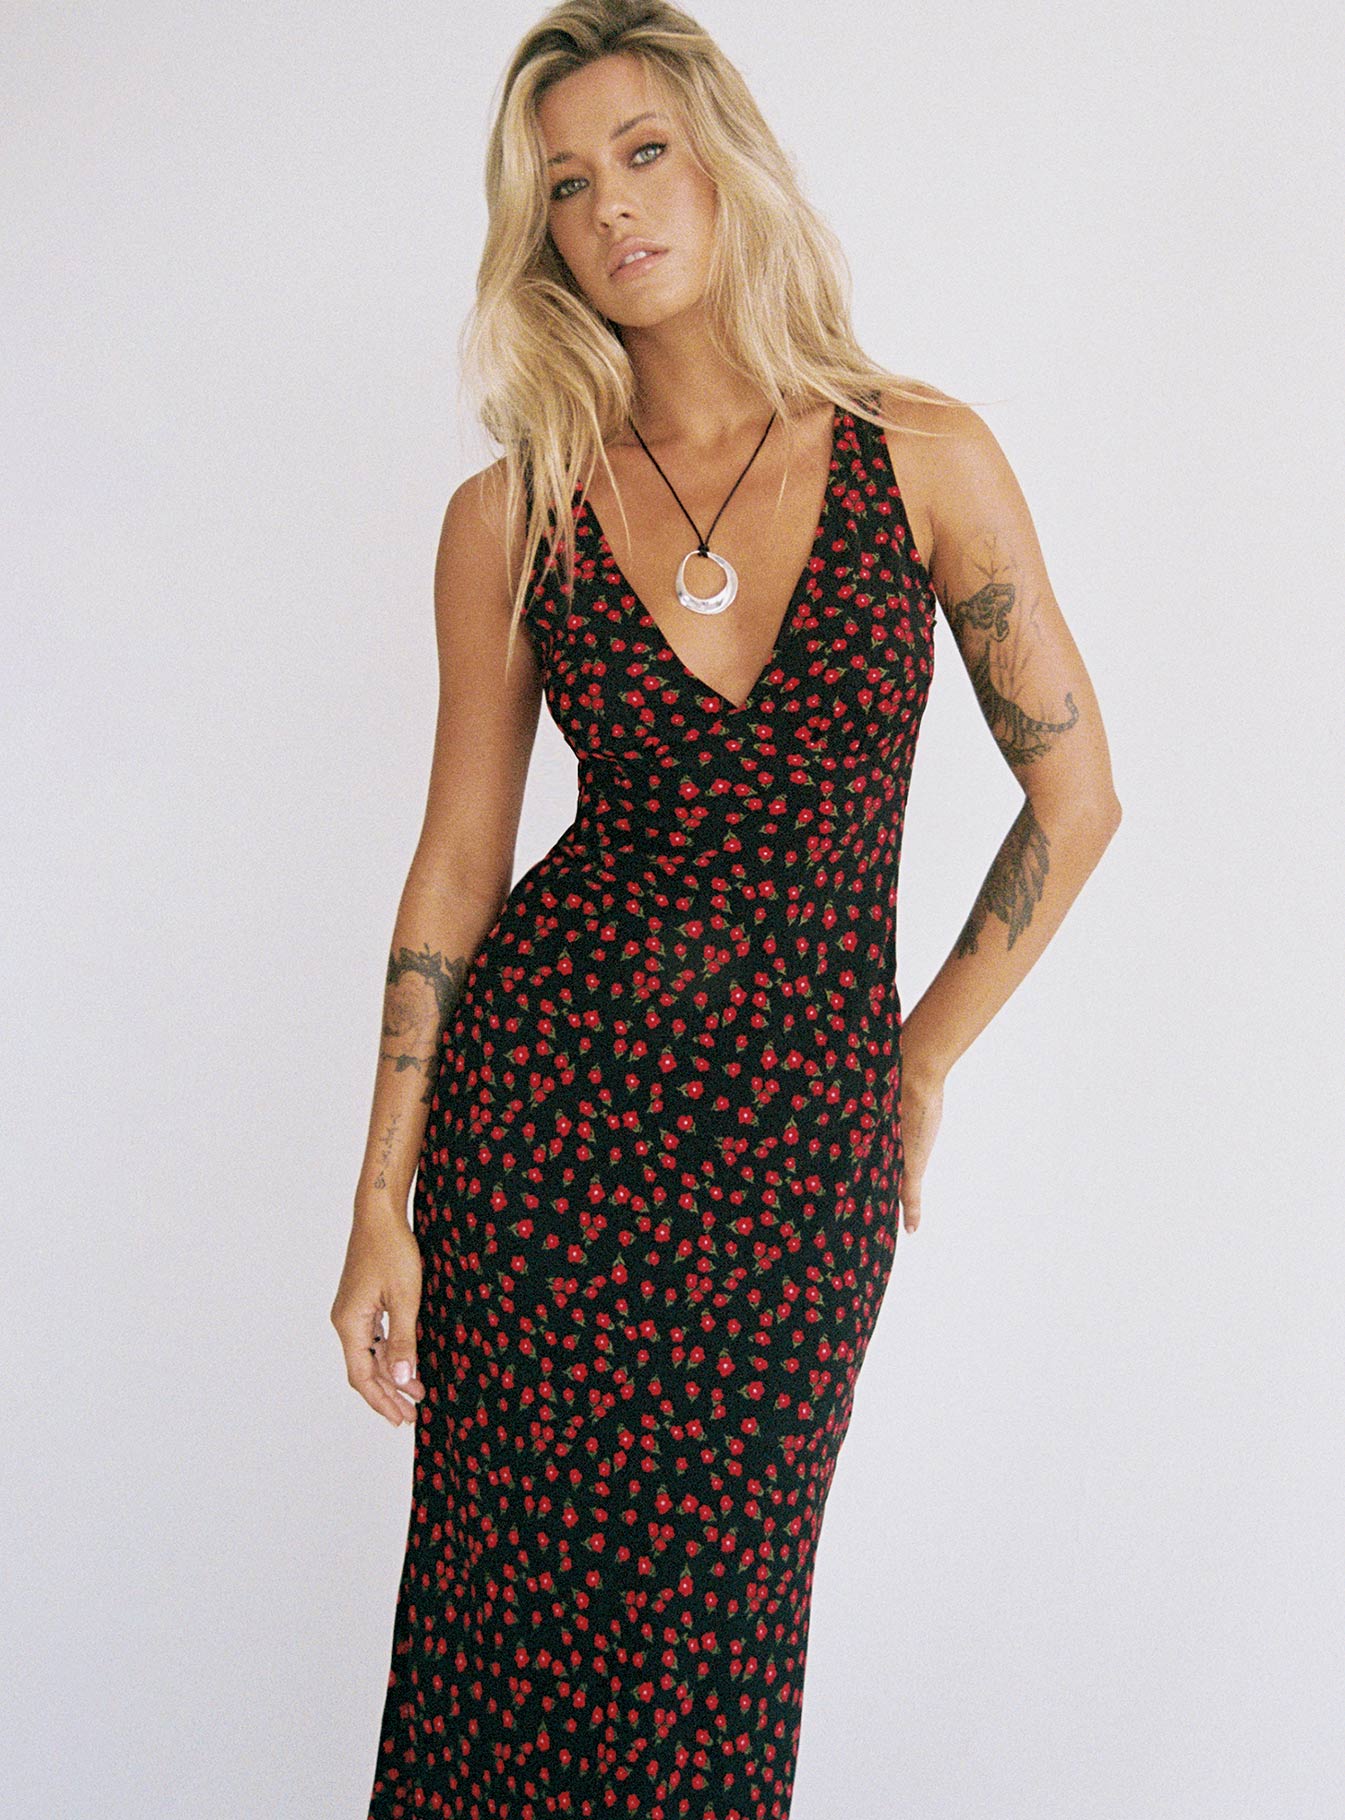 black dress with red flowers